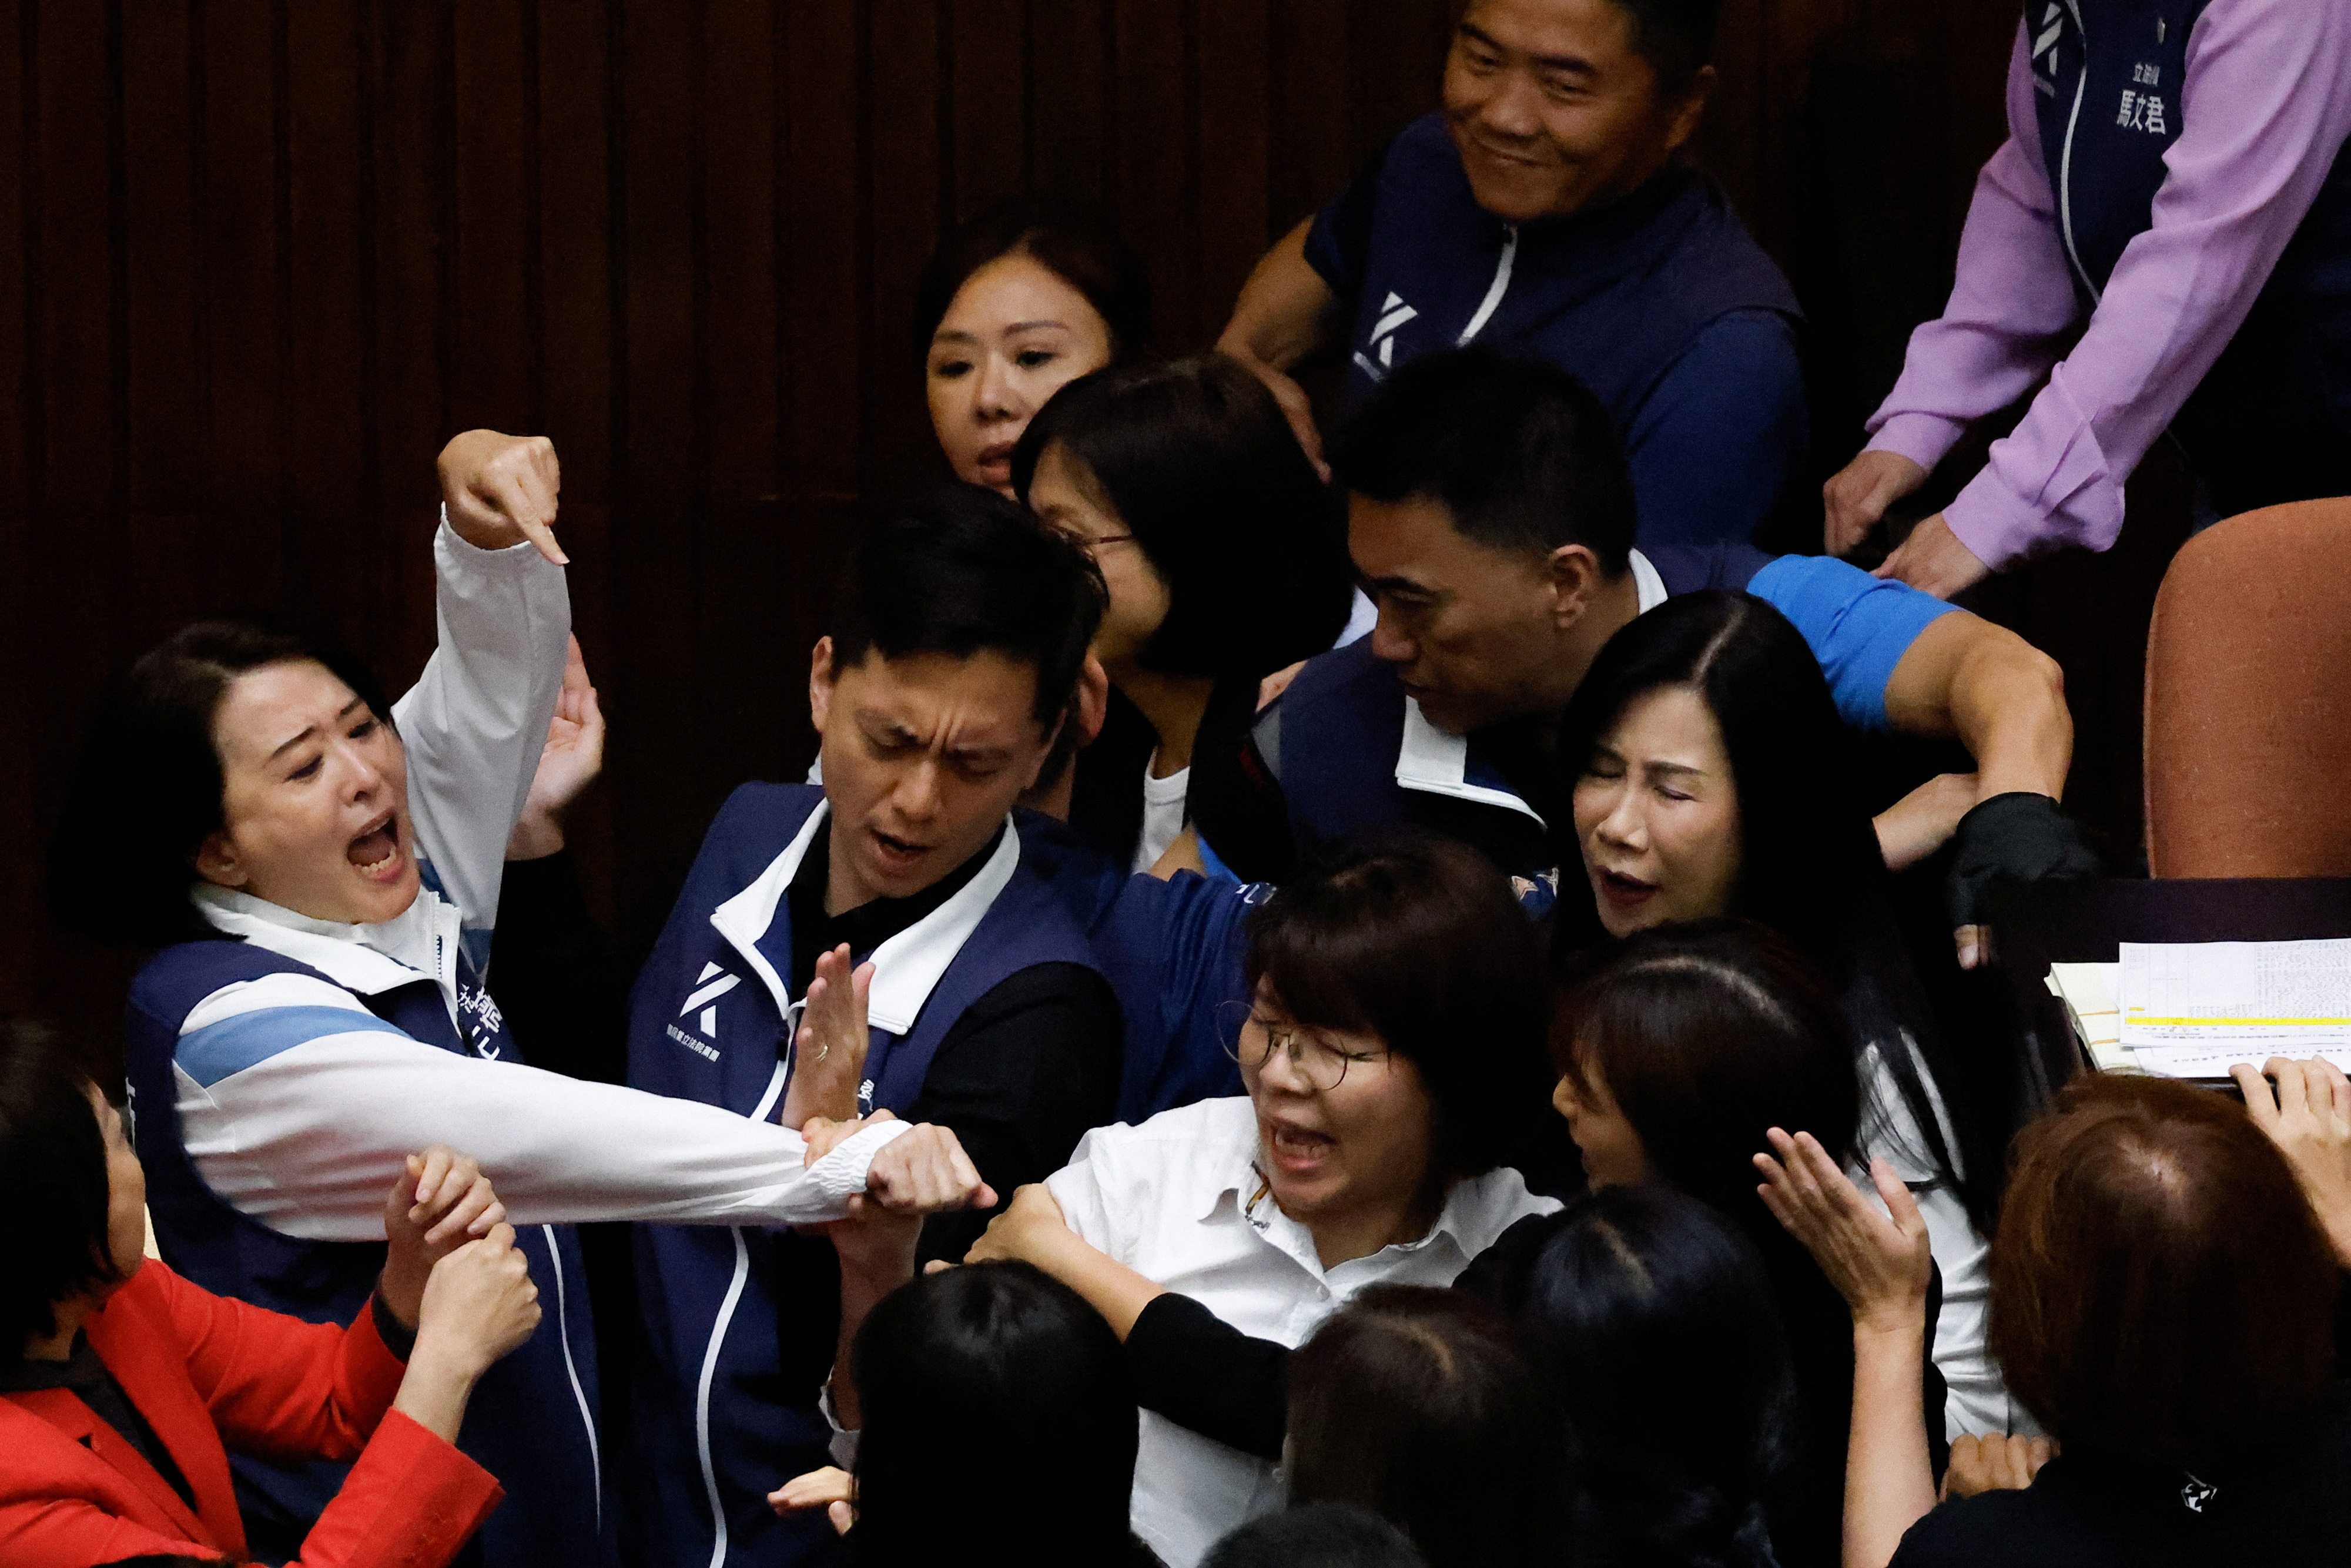 Taiwan lawmakers argue and exchange blows during a parliamentary session in Taipei